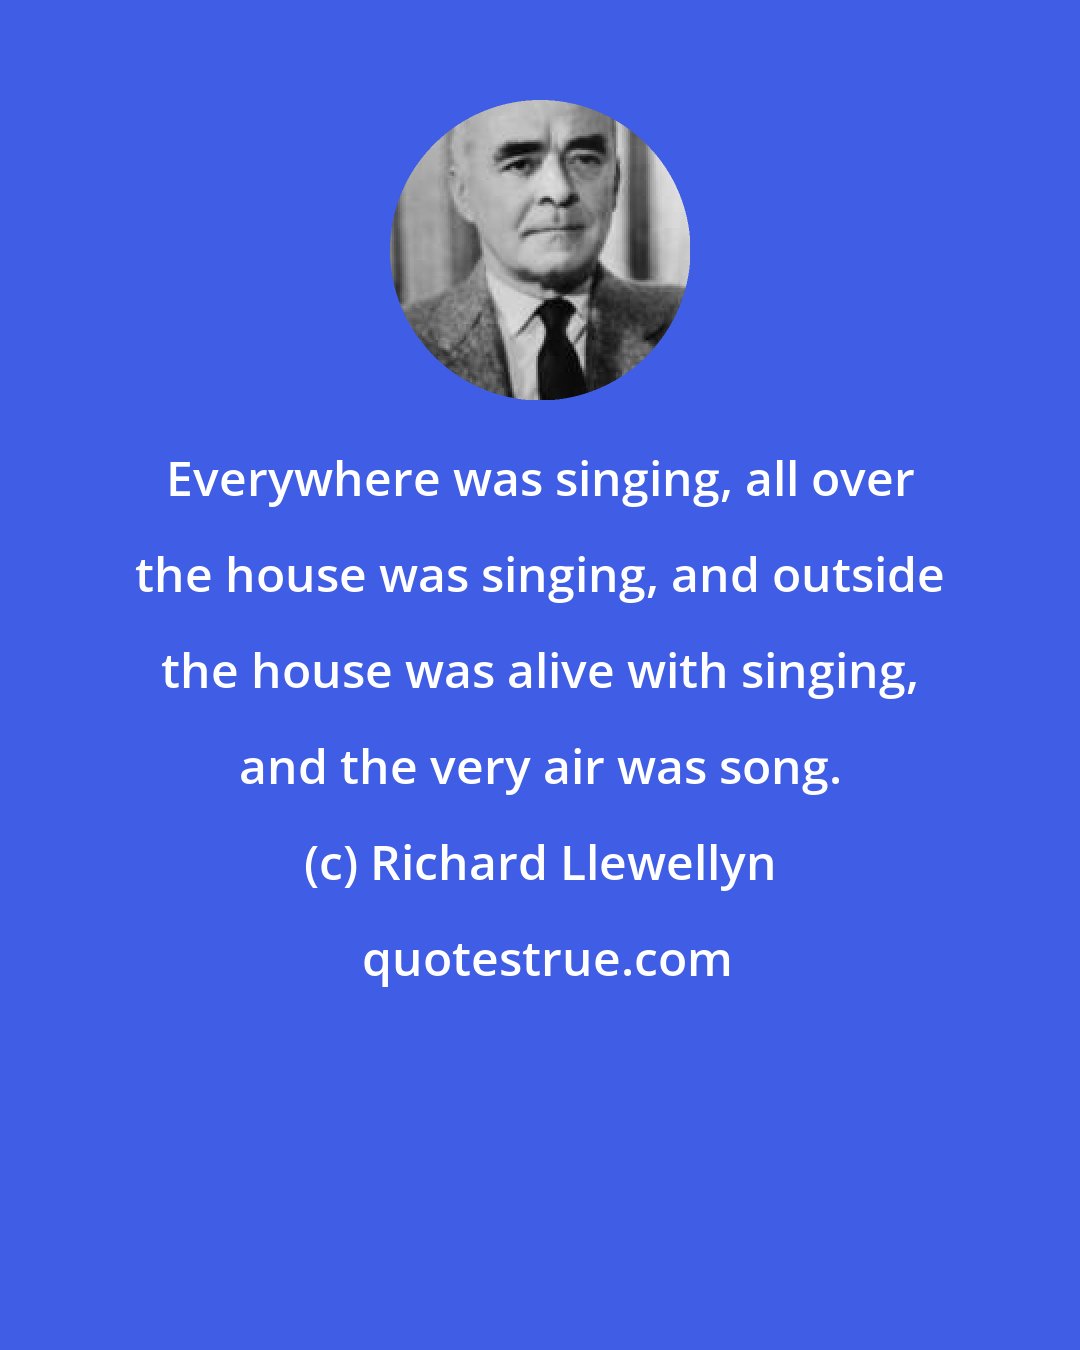 Richard Llewellyn: Everywhere was singing, all over the house was singing, and outside the house was alive with singing, and the very air was song.